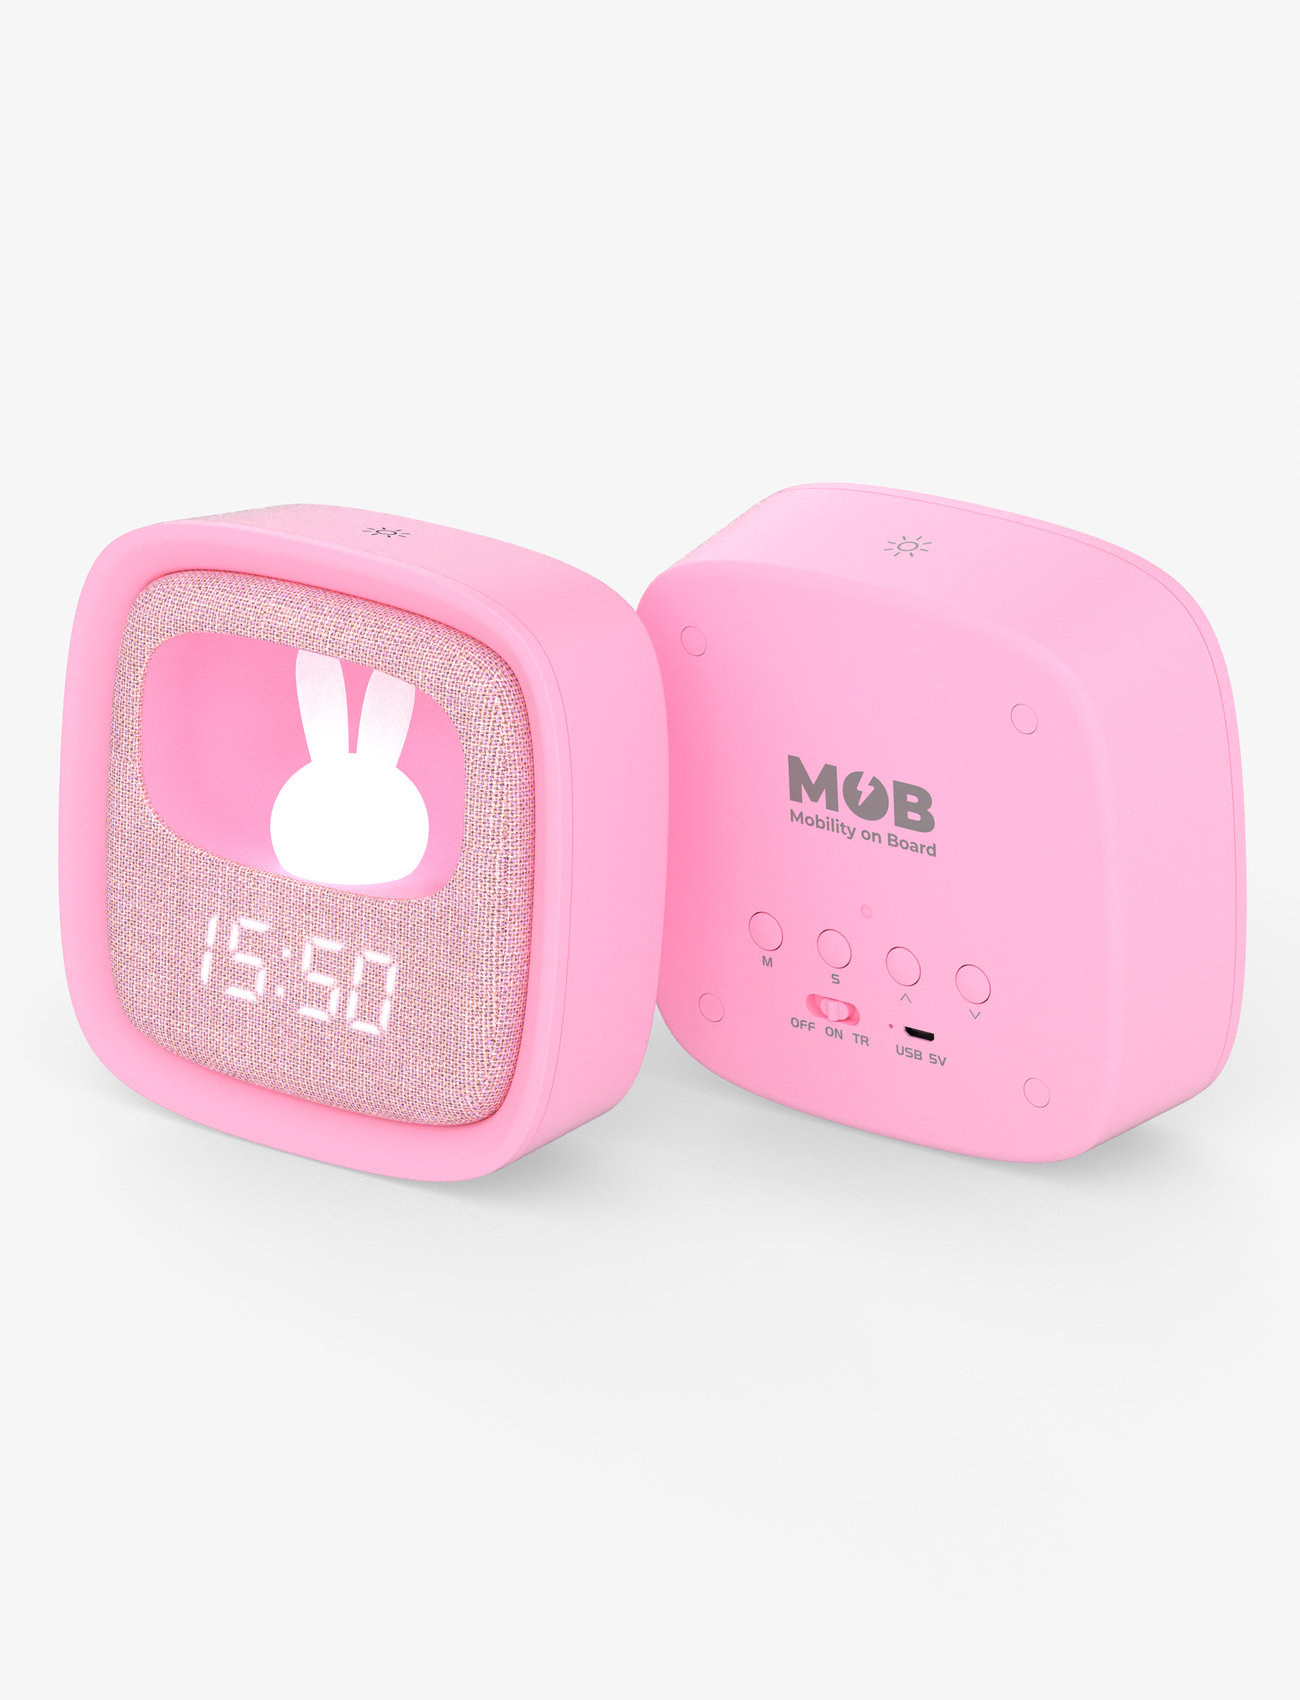 Mobility On Board - Billy Clock and light - die niedrigsten preise - marshmallow - 1